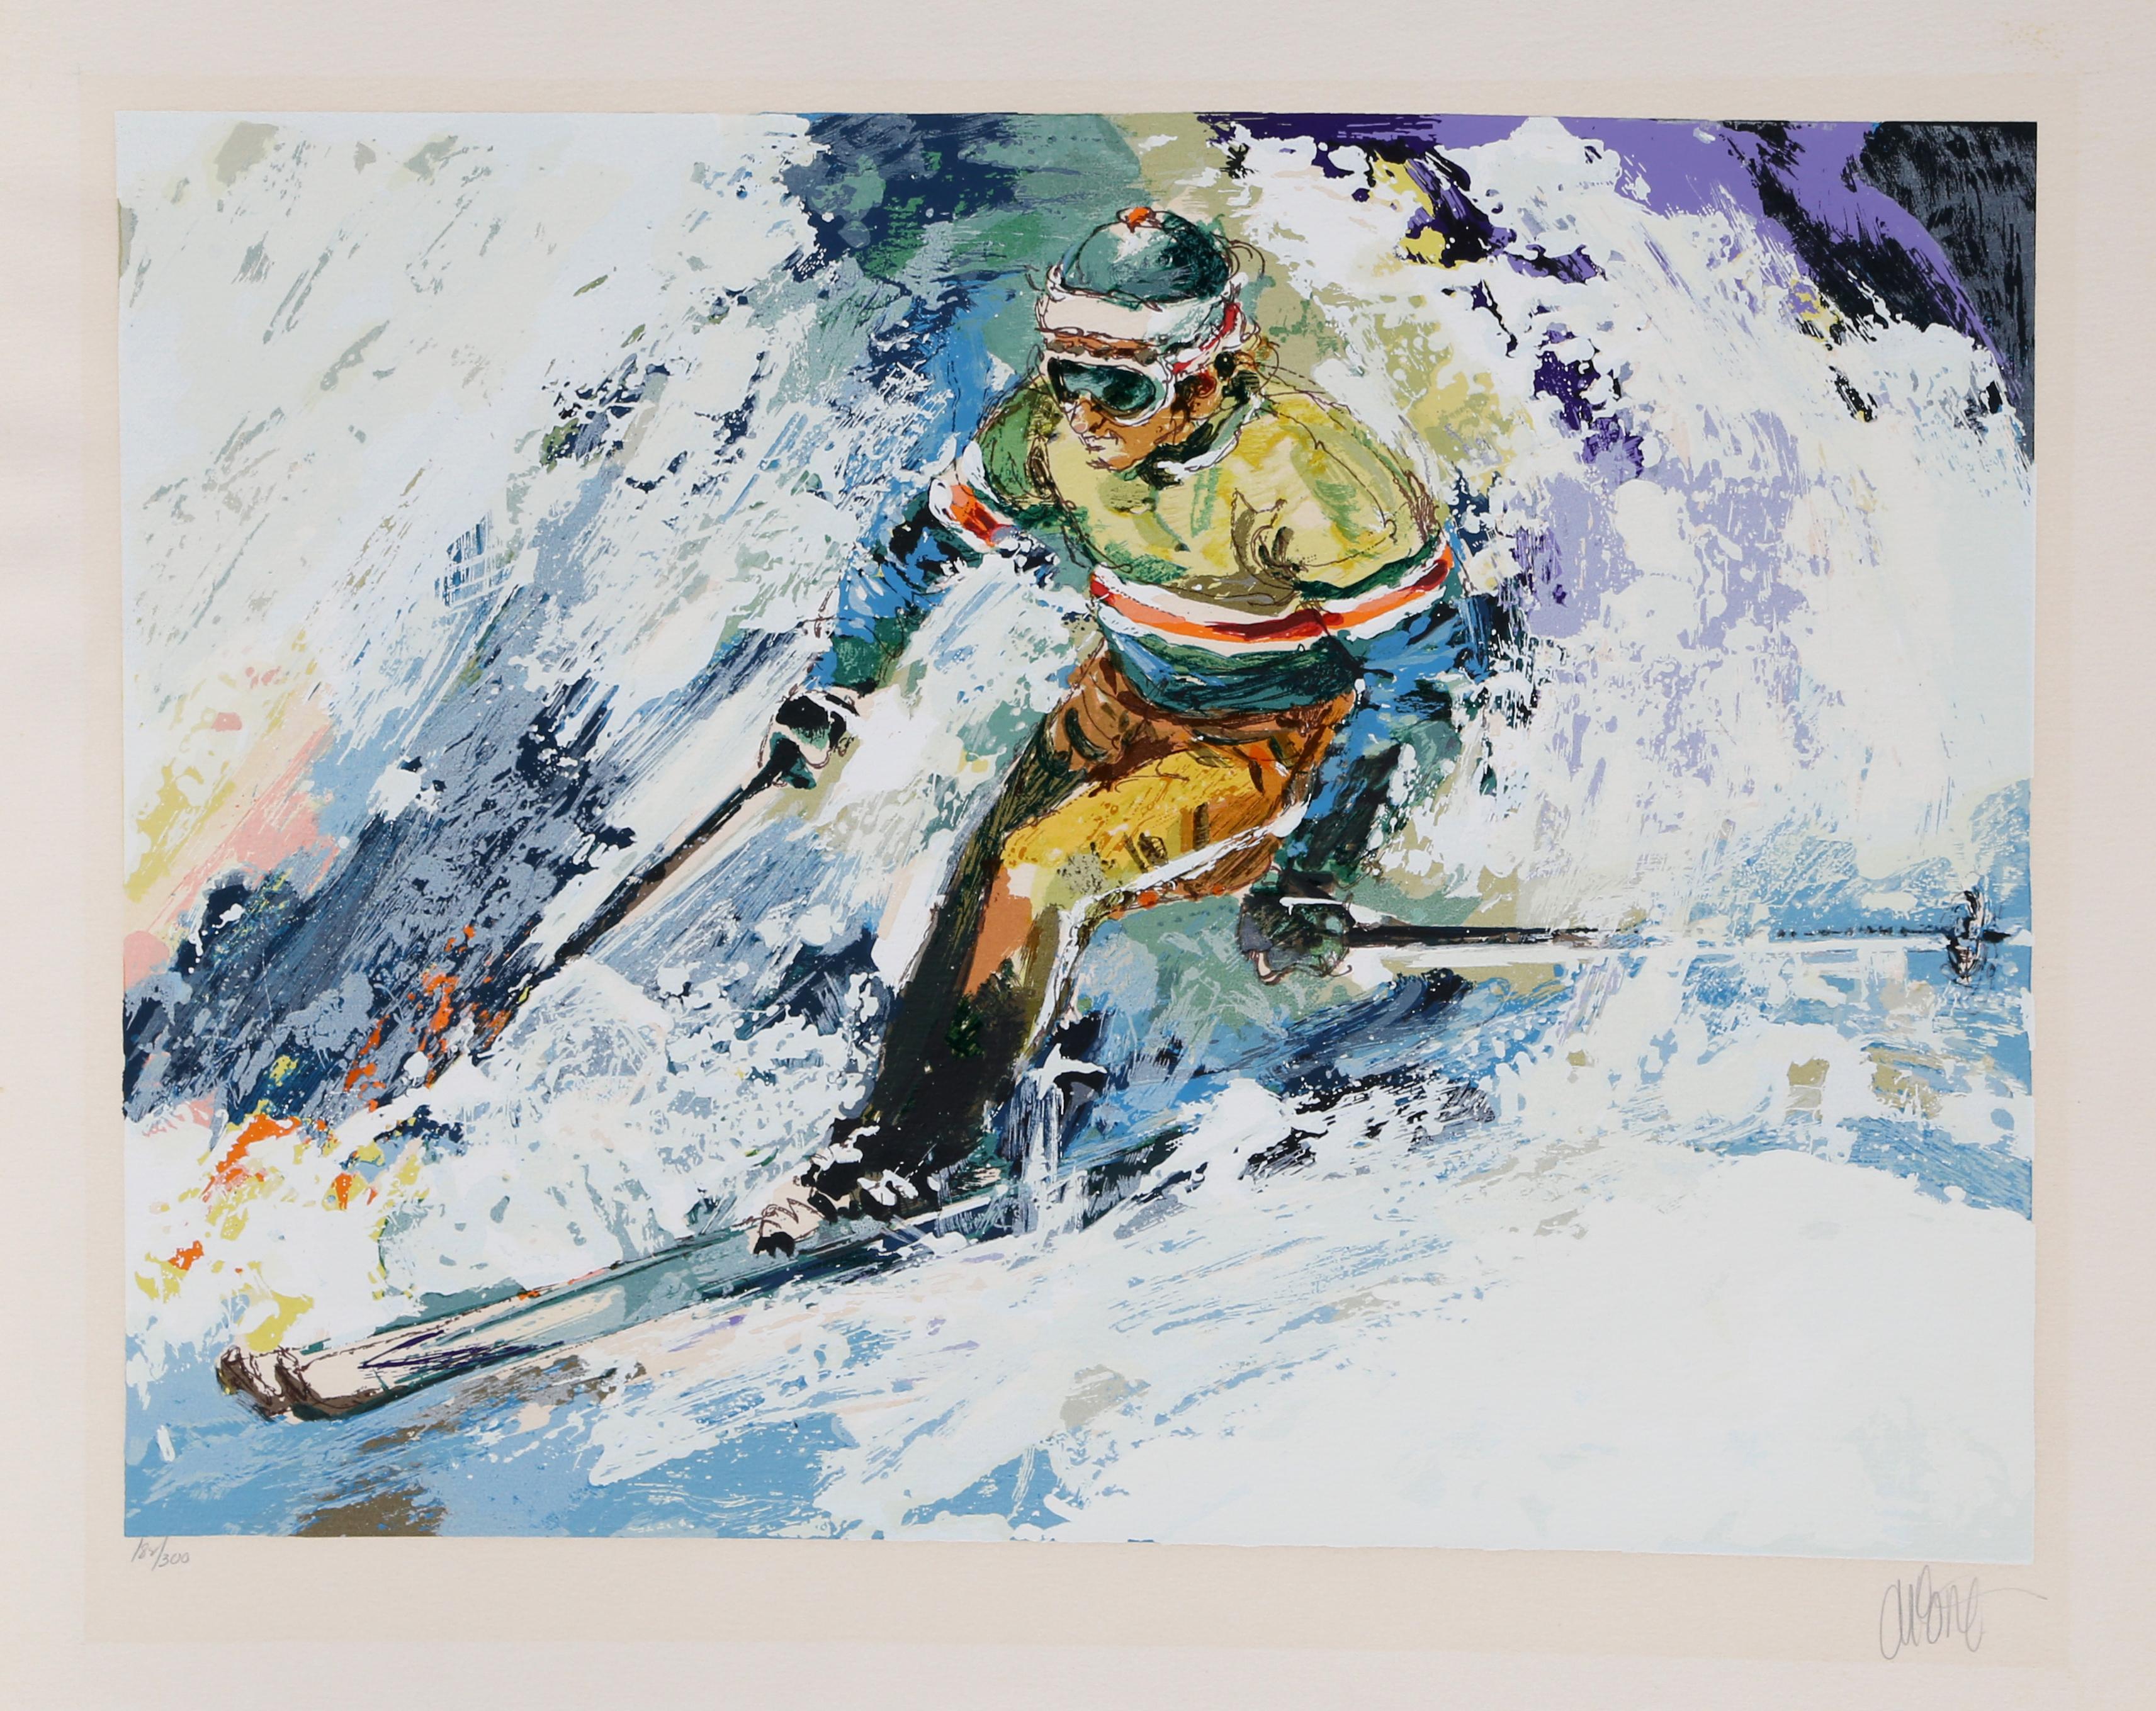 Skier II
Wayland Moore, American (1935)
Date: circa 1980
Screenprint, signed and numbered in pencil
Edition of 182/300
Image Size: 18 x 24 inches
Size: 23 x 29 in. (58.42 x 73.66 cm)